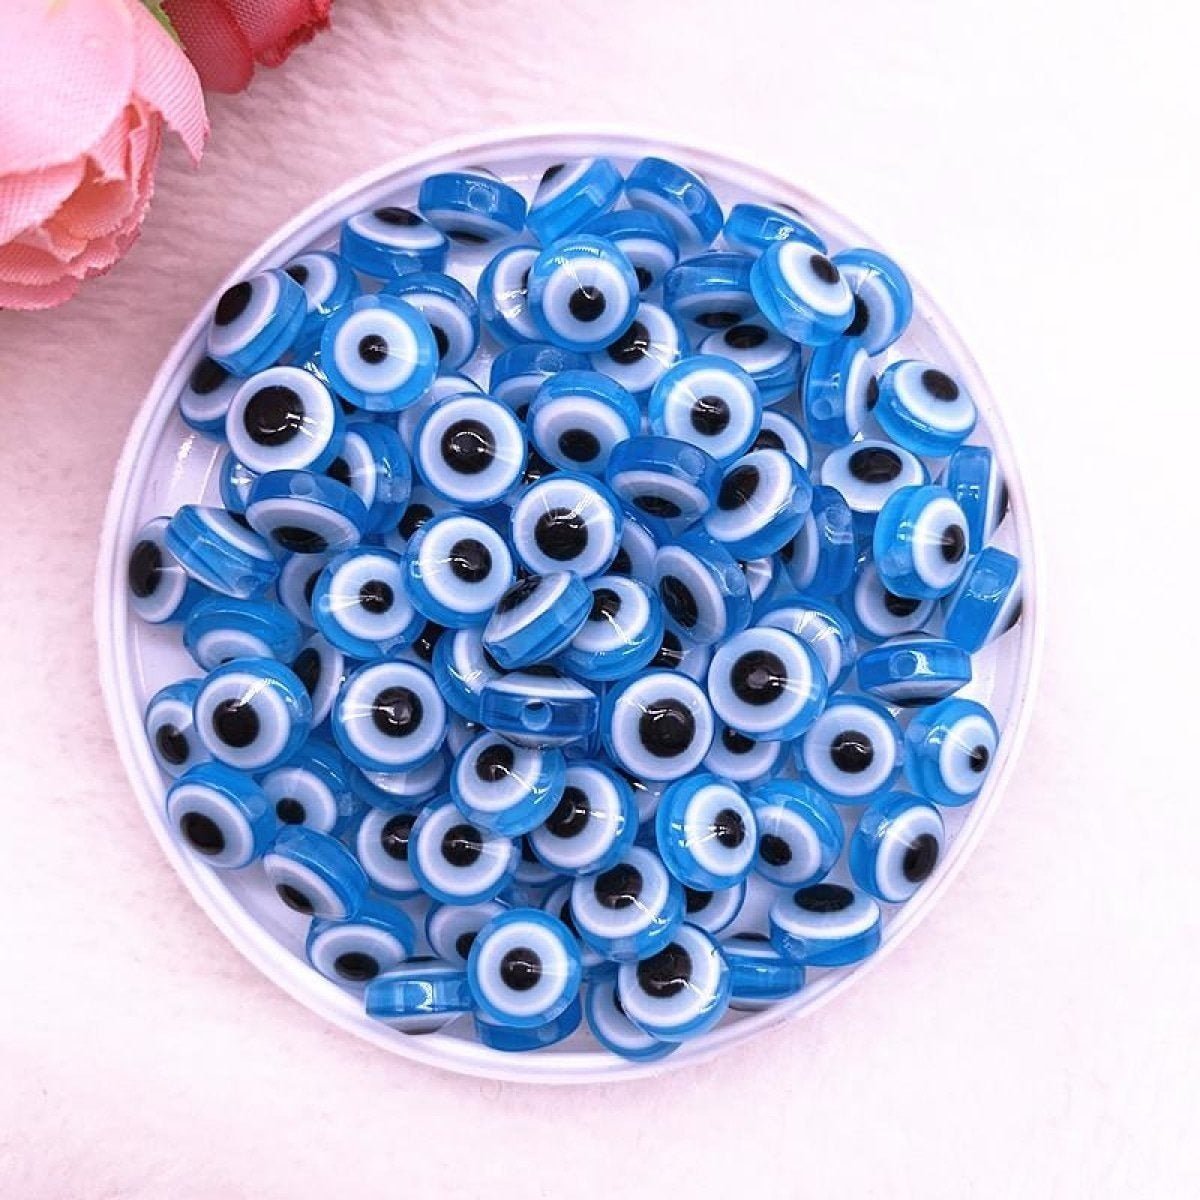 48pcs 8/10mm Oval Resin Spacer Beads Double Sided Eyes for Jewellery Making DIY Bracelet Beads Set B - Deep Blue 8mm - Asia Sell